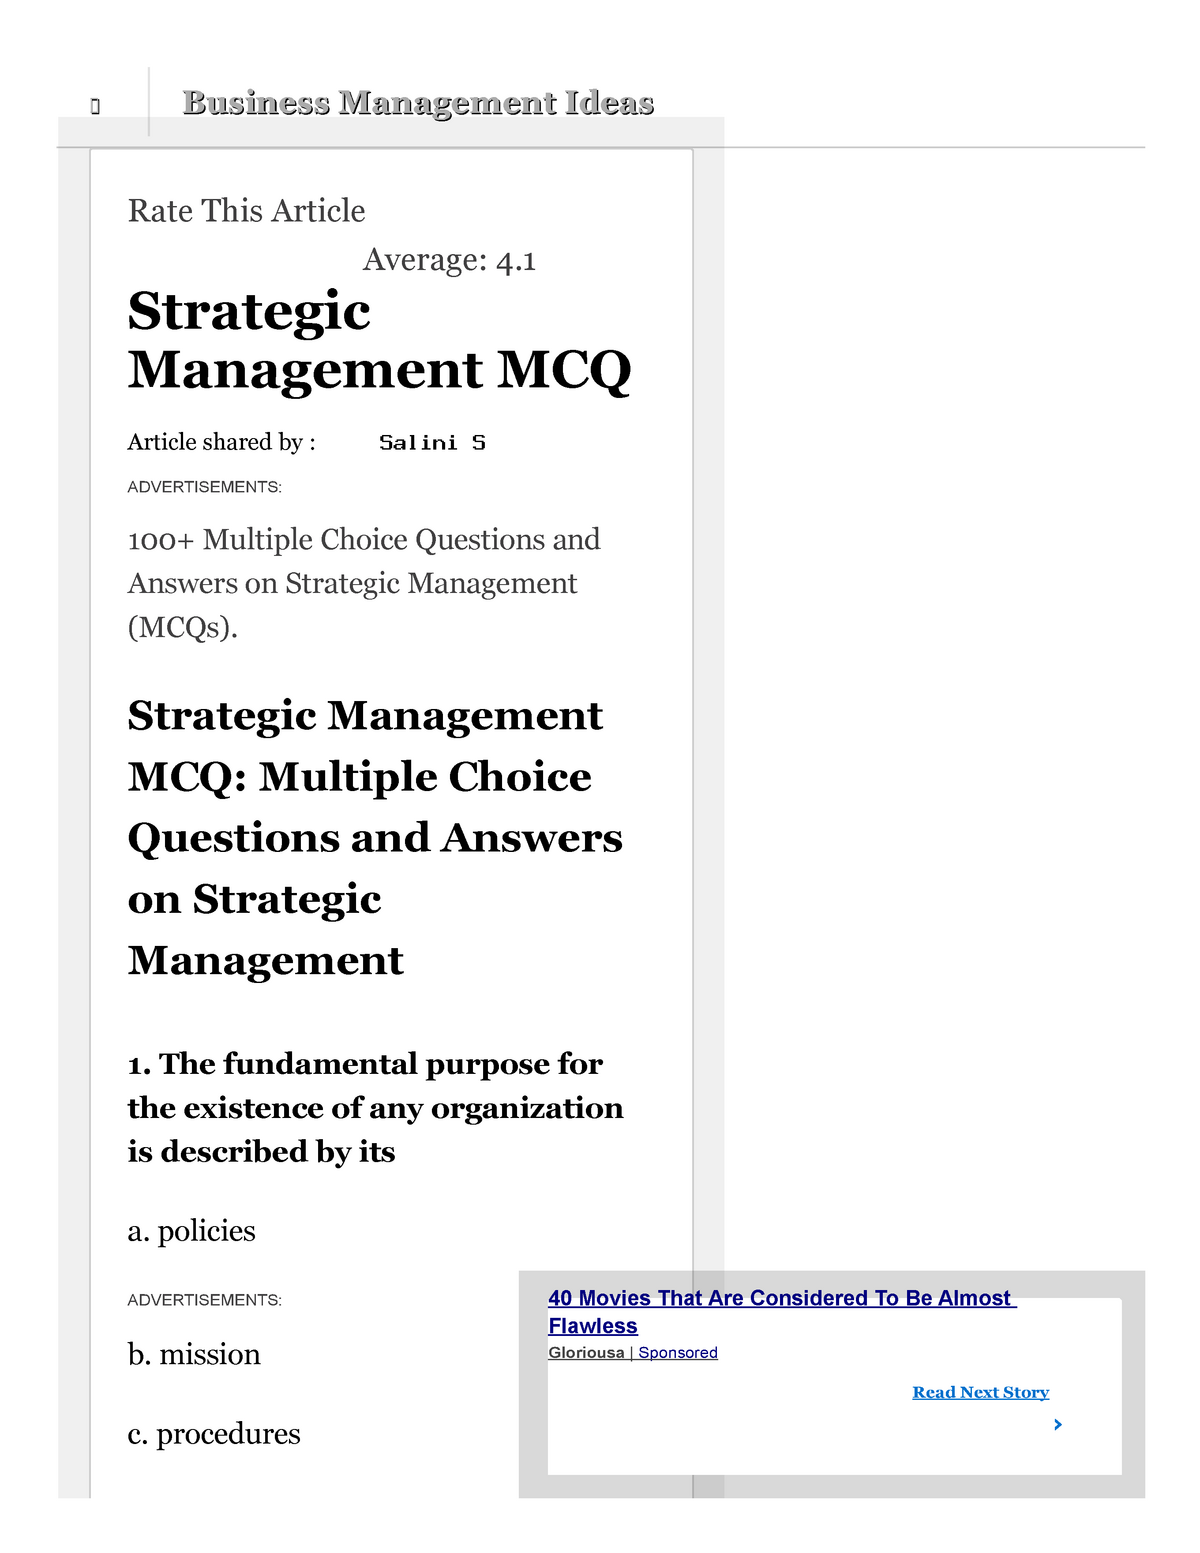 case study on strategic management with questions and answers